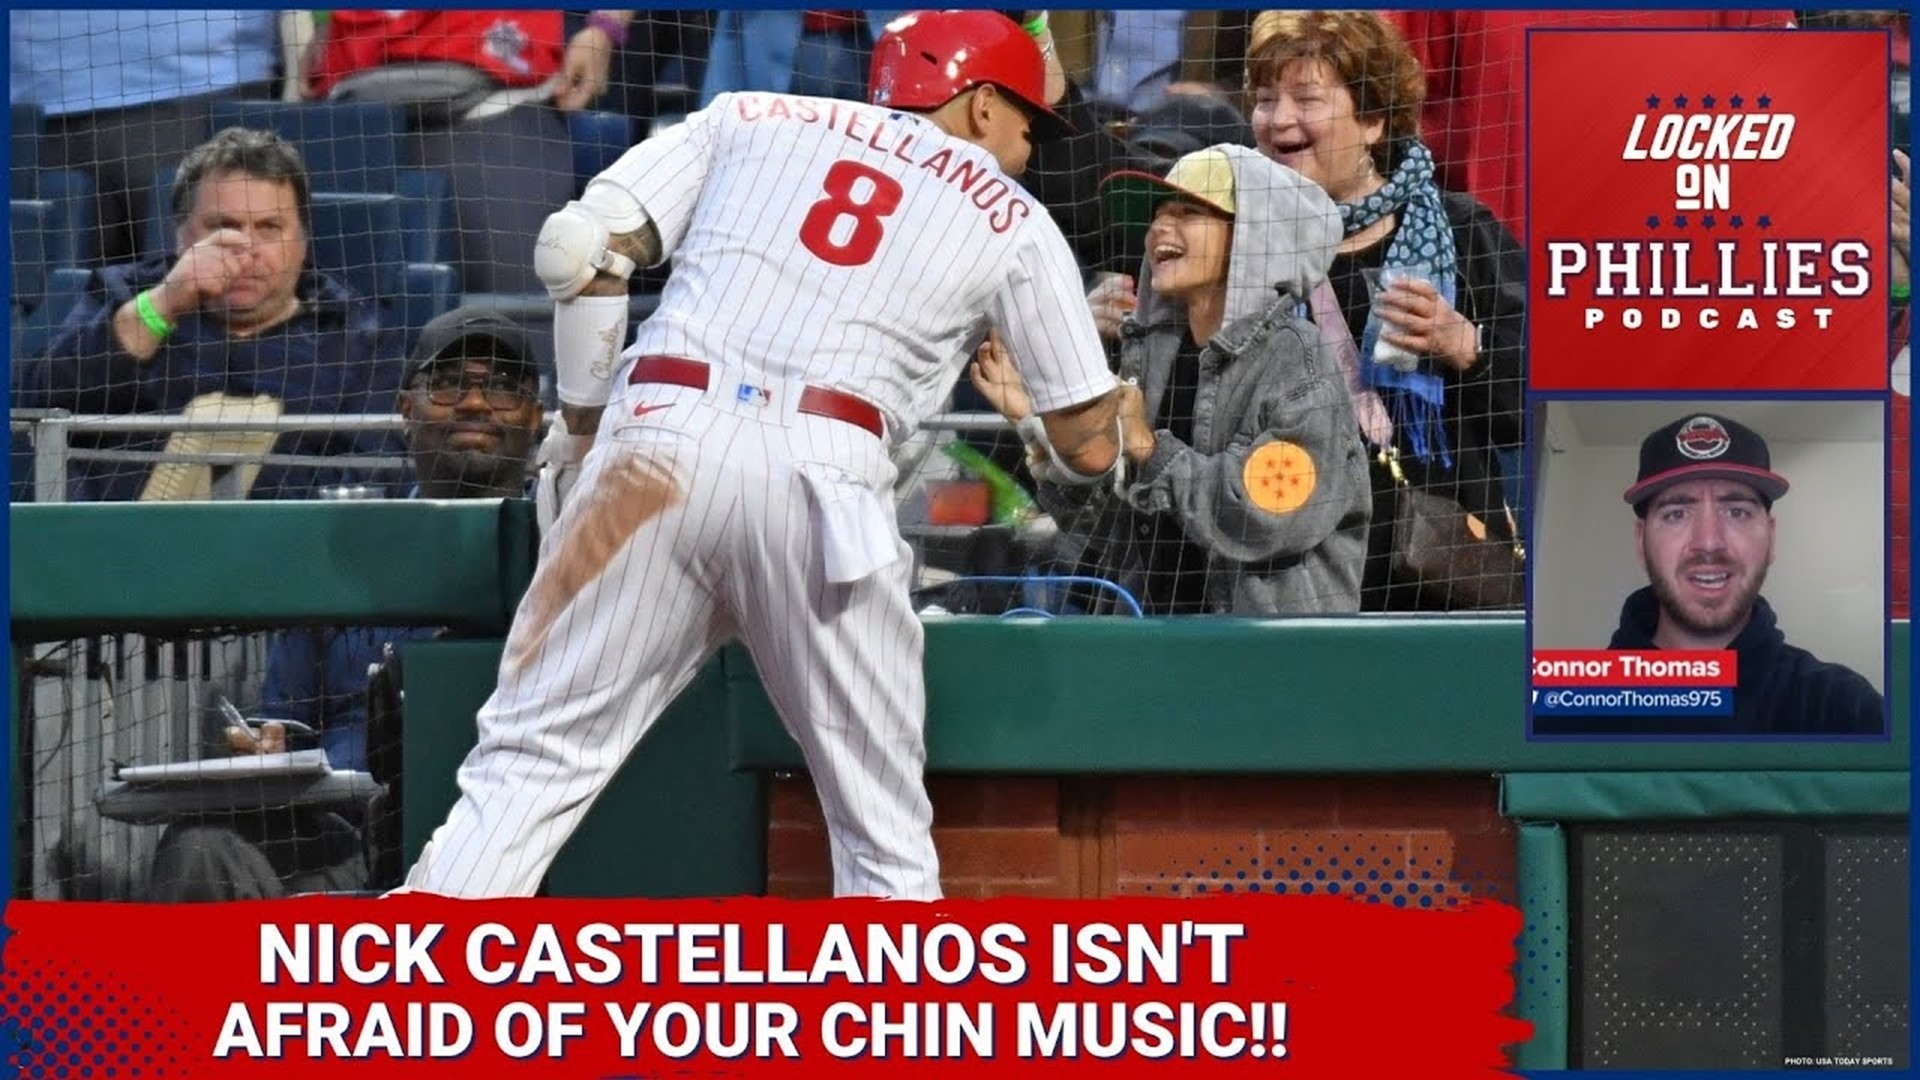 In today's episode, Connor reacts to the Philadelphia Phillies' 8-4 win over the Toronto Blue Jays yesterday evening behind a strong game from Nick Castellanos.